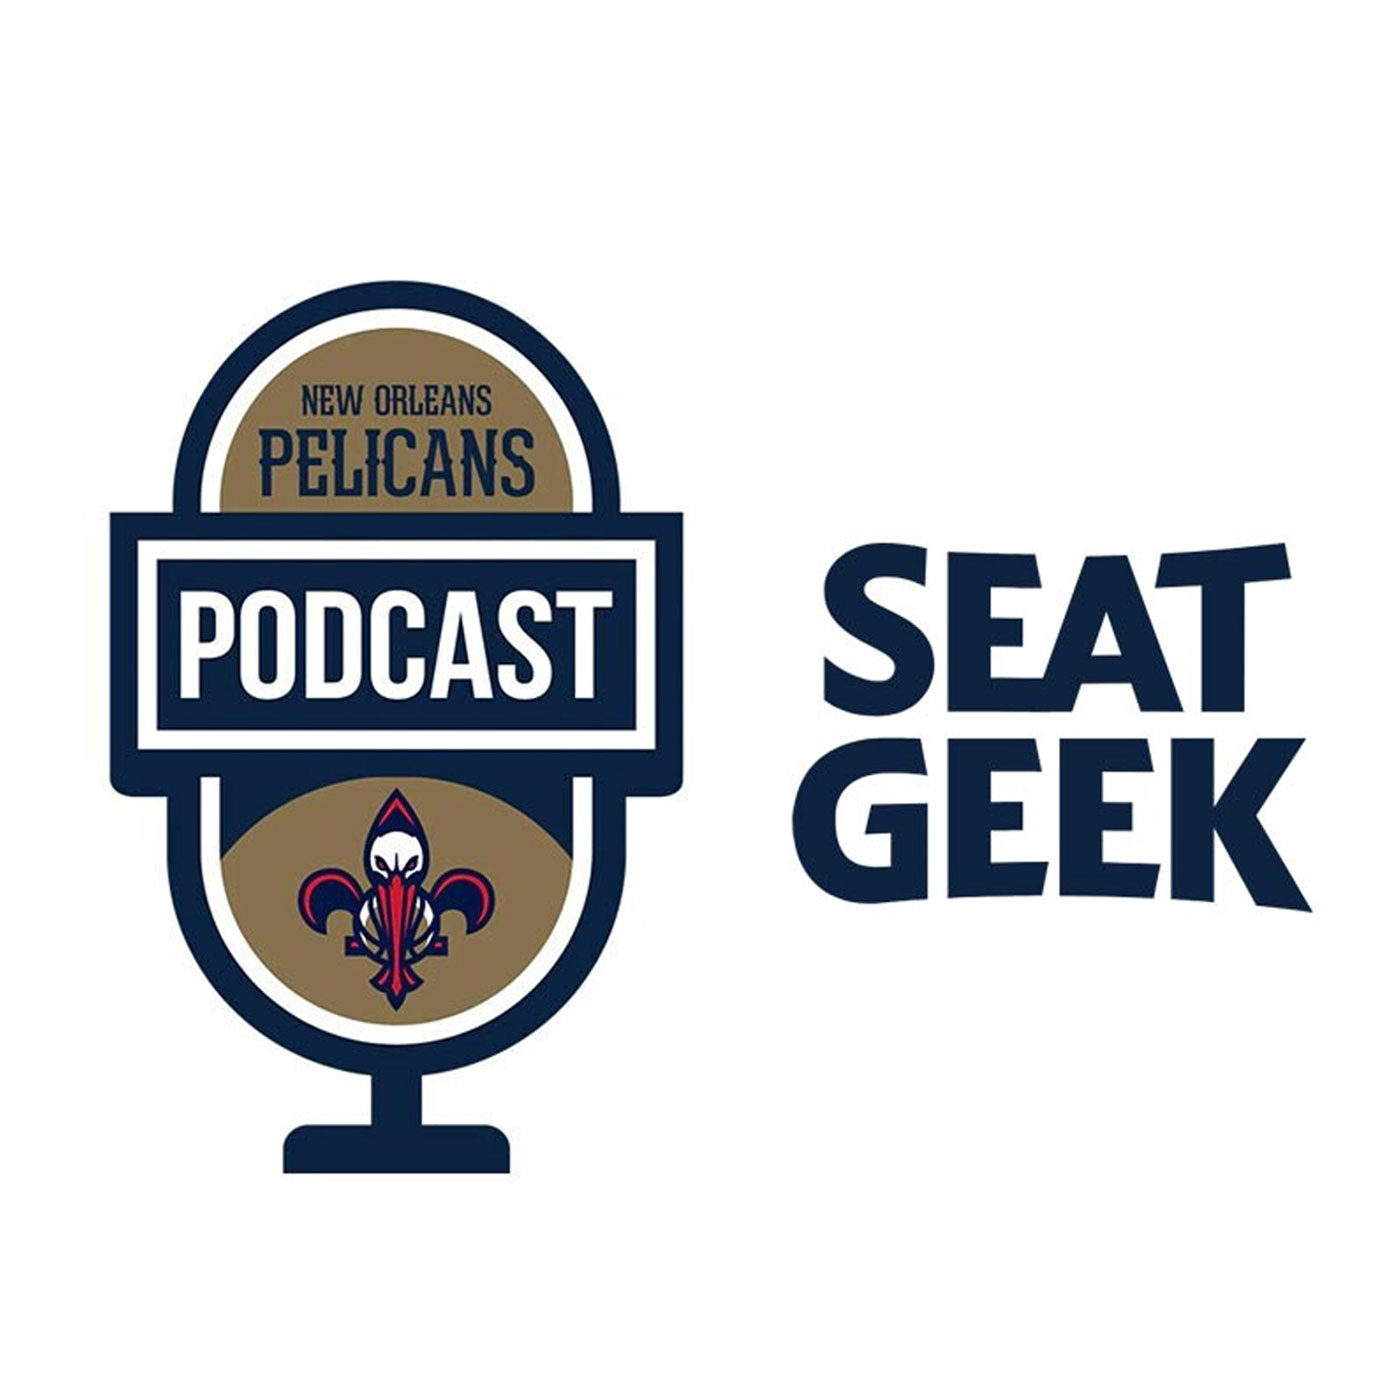 NBA Writer Ben Golliver on the New Orleans Pelicans podcast presented by SeatGeek - April 21, 2021